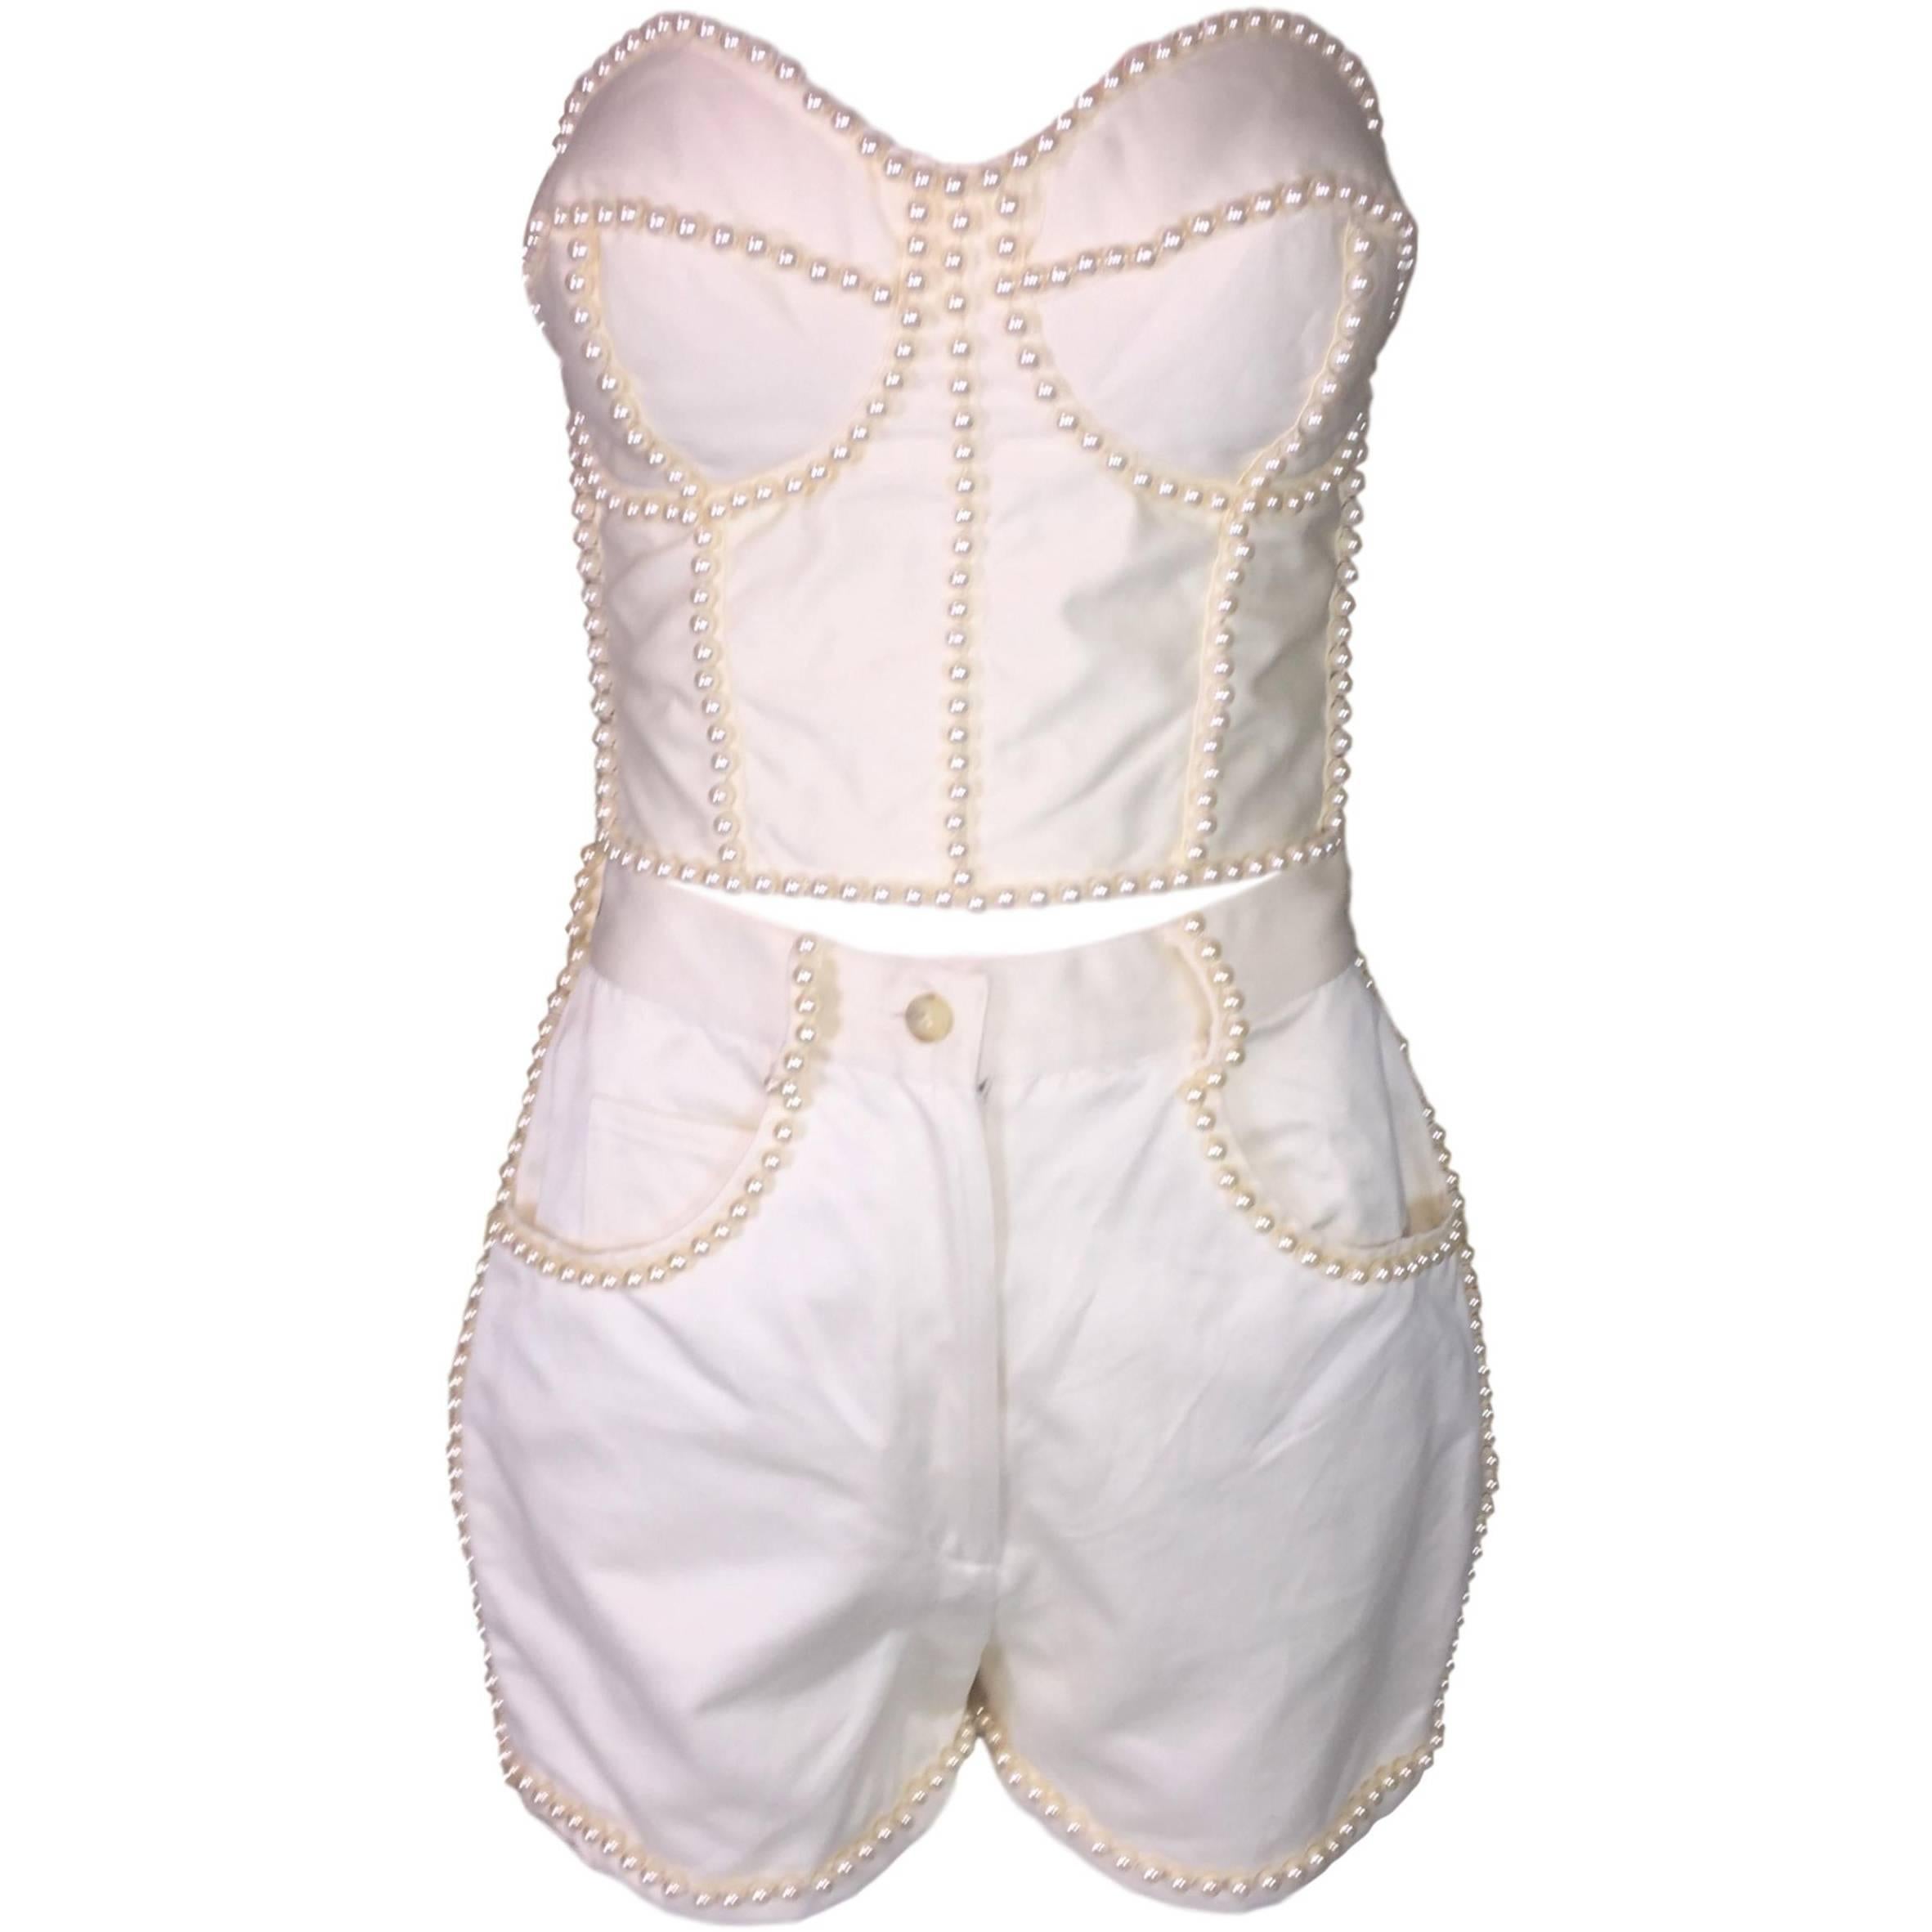 S/S 1992 Dolce & Gabbana Ivory Pearl Embellished Pin-Up Bustier High Waist Short